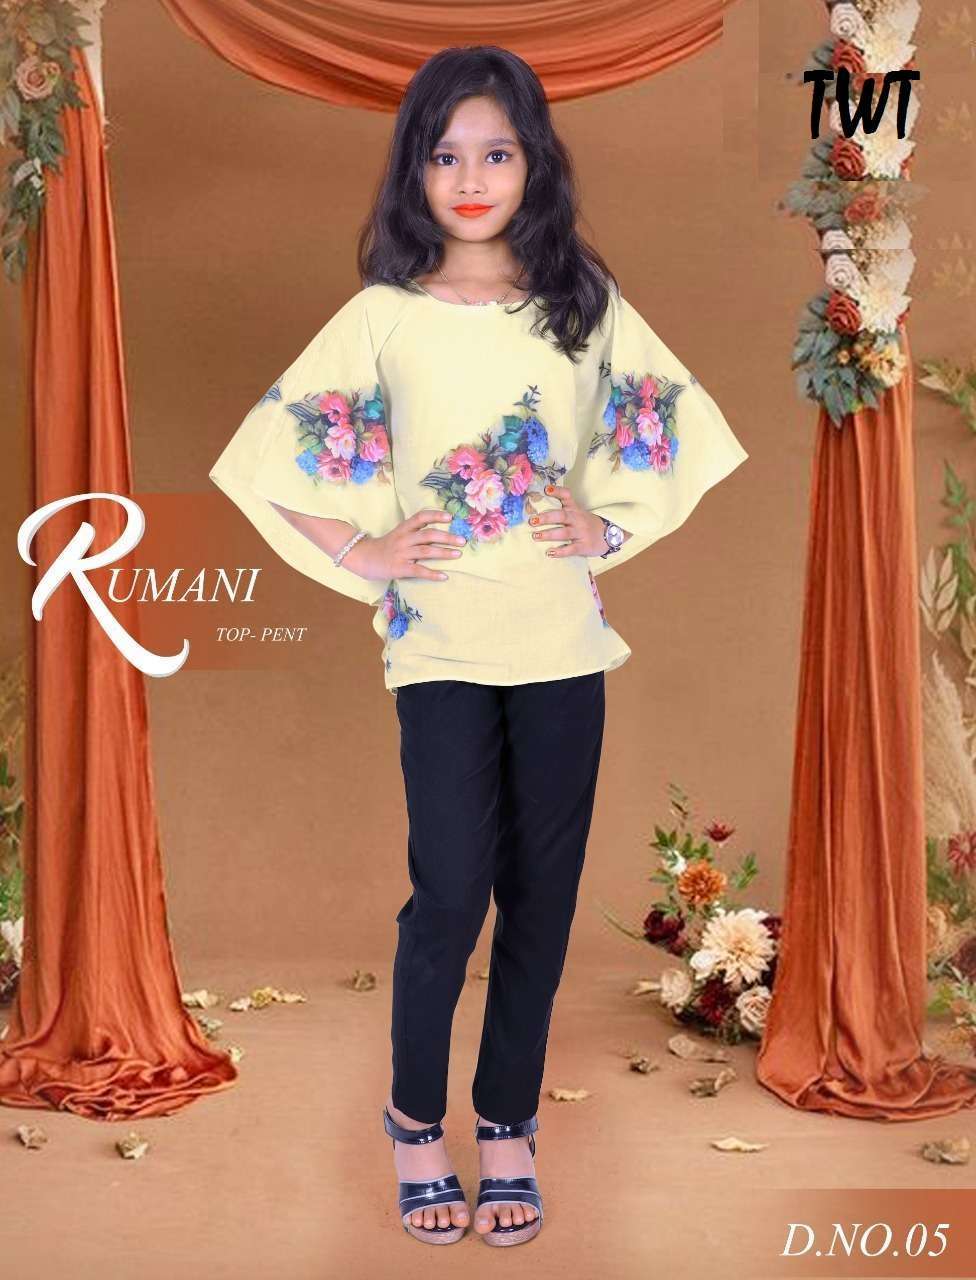 twt rumani series 01-06 cotton top with pant kids wear